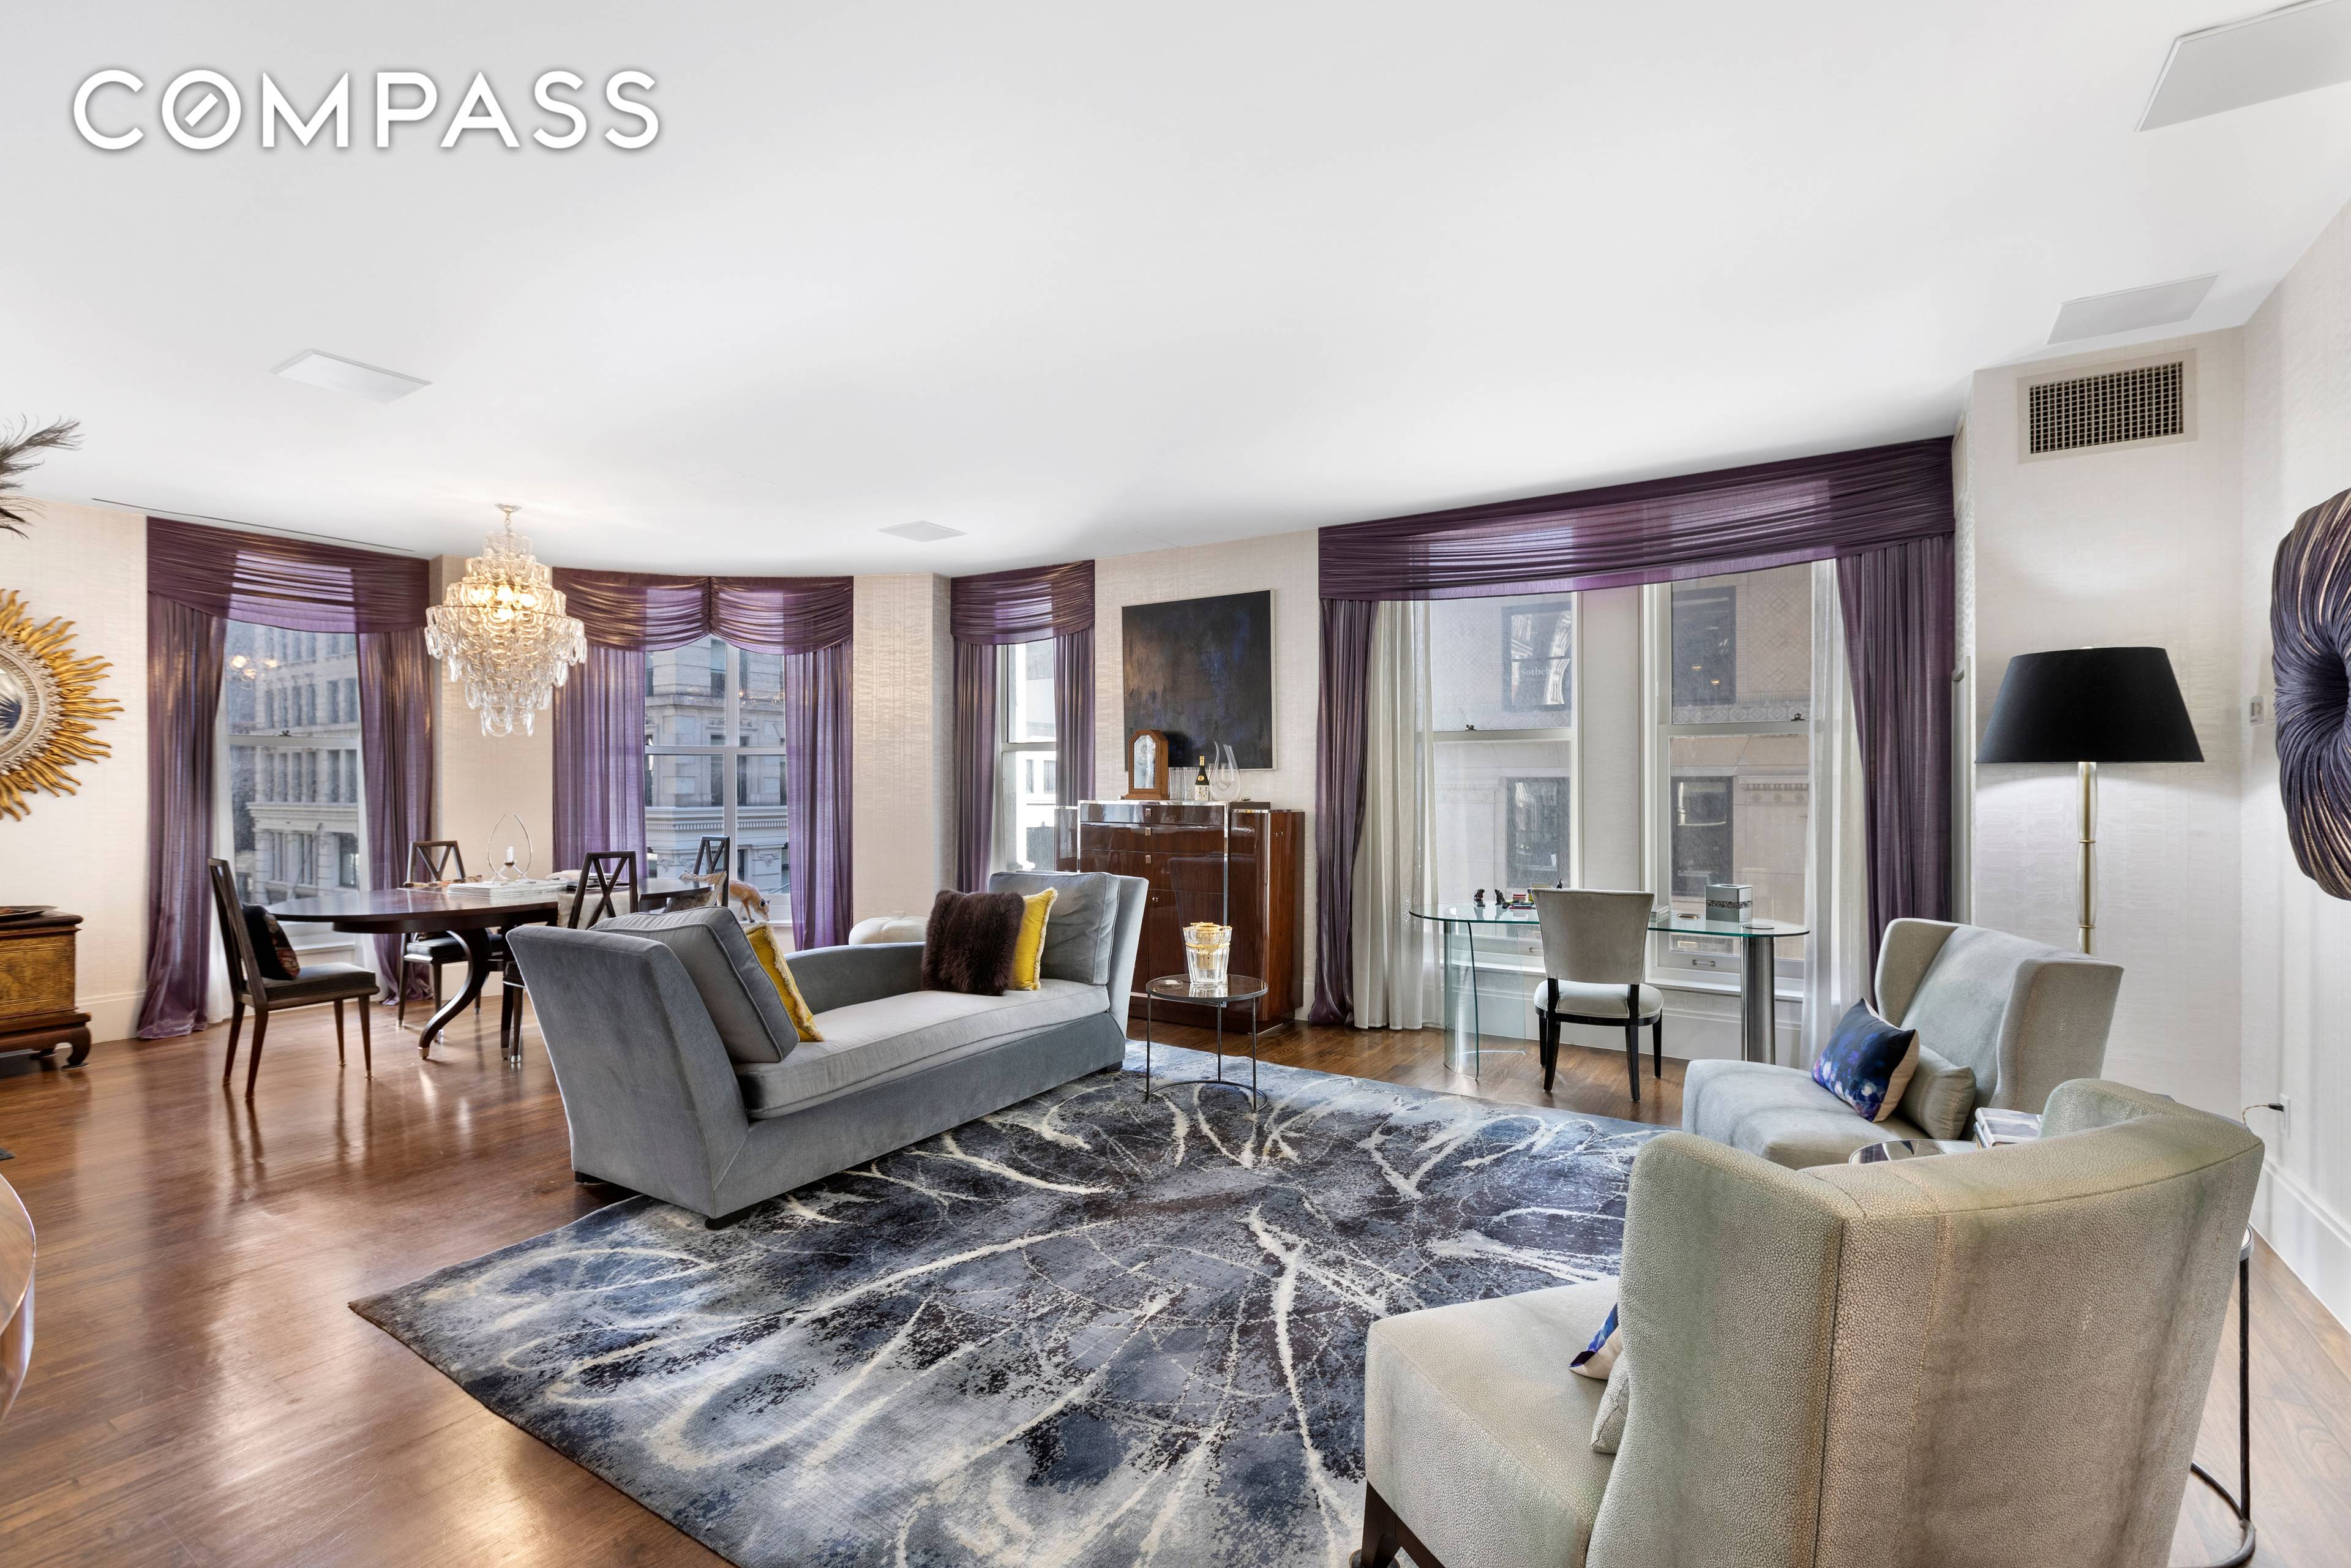 Sitting in the heart of the Flatiron District, the iconic 1847 Merchant s Bank of New York, offers luxurious and unique condominiums that New Yorkers dream of owning.